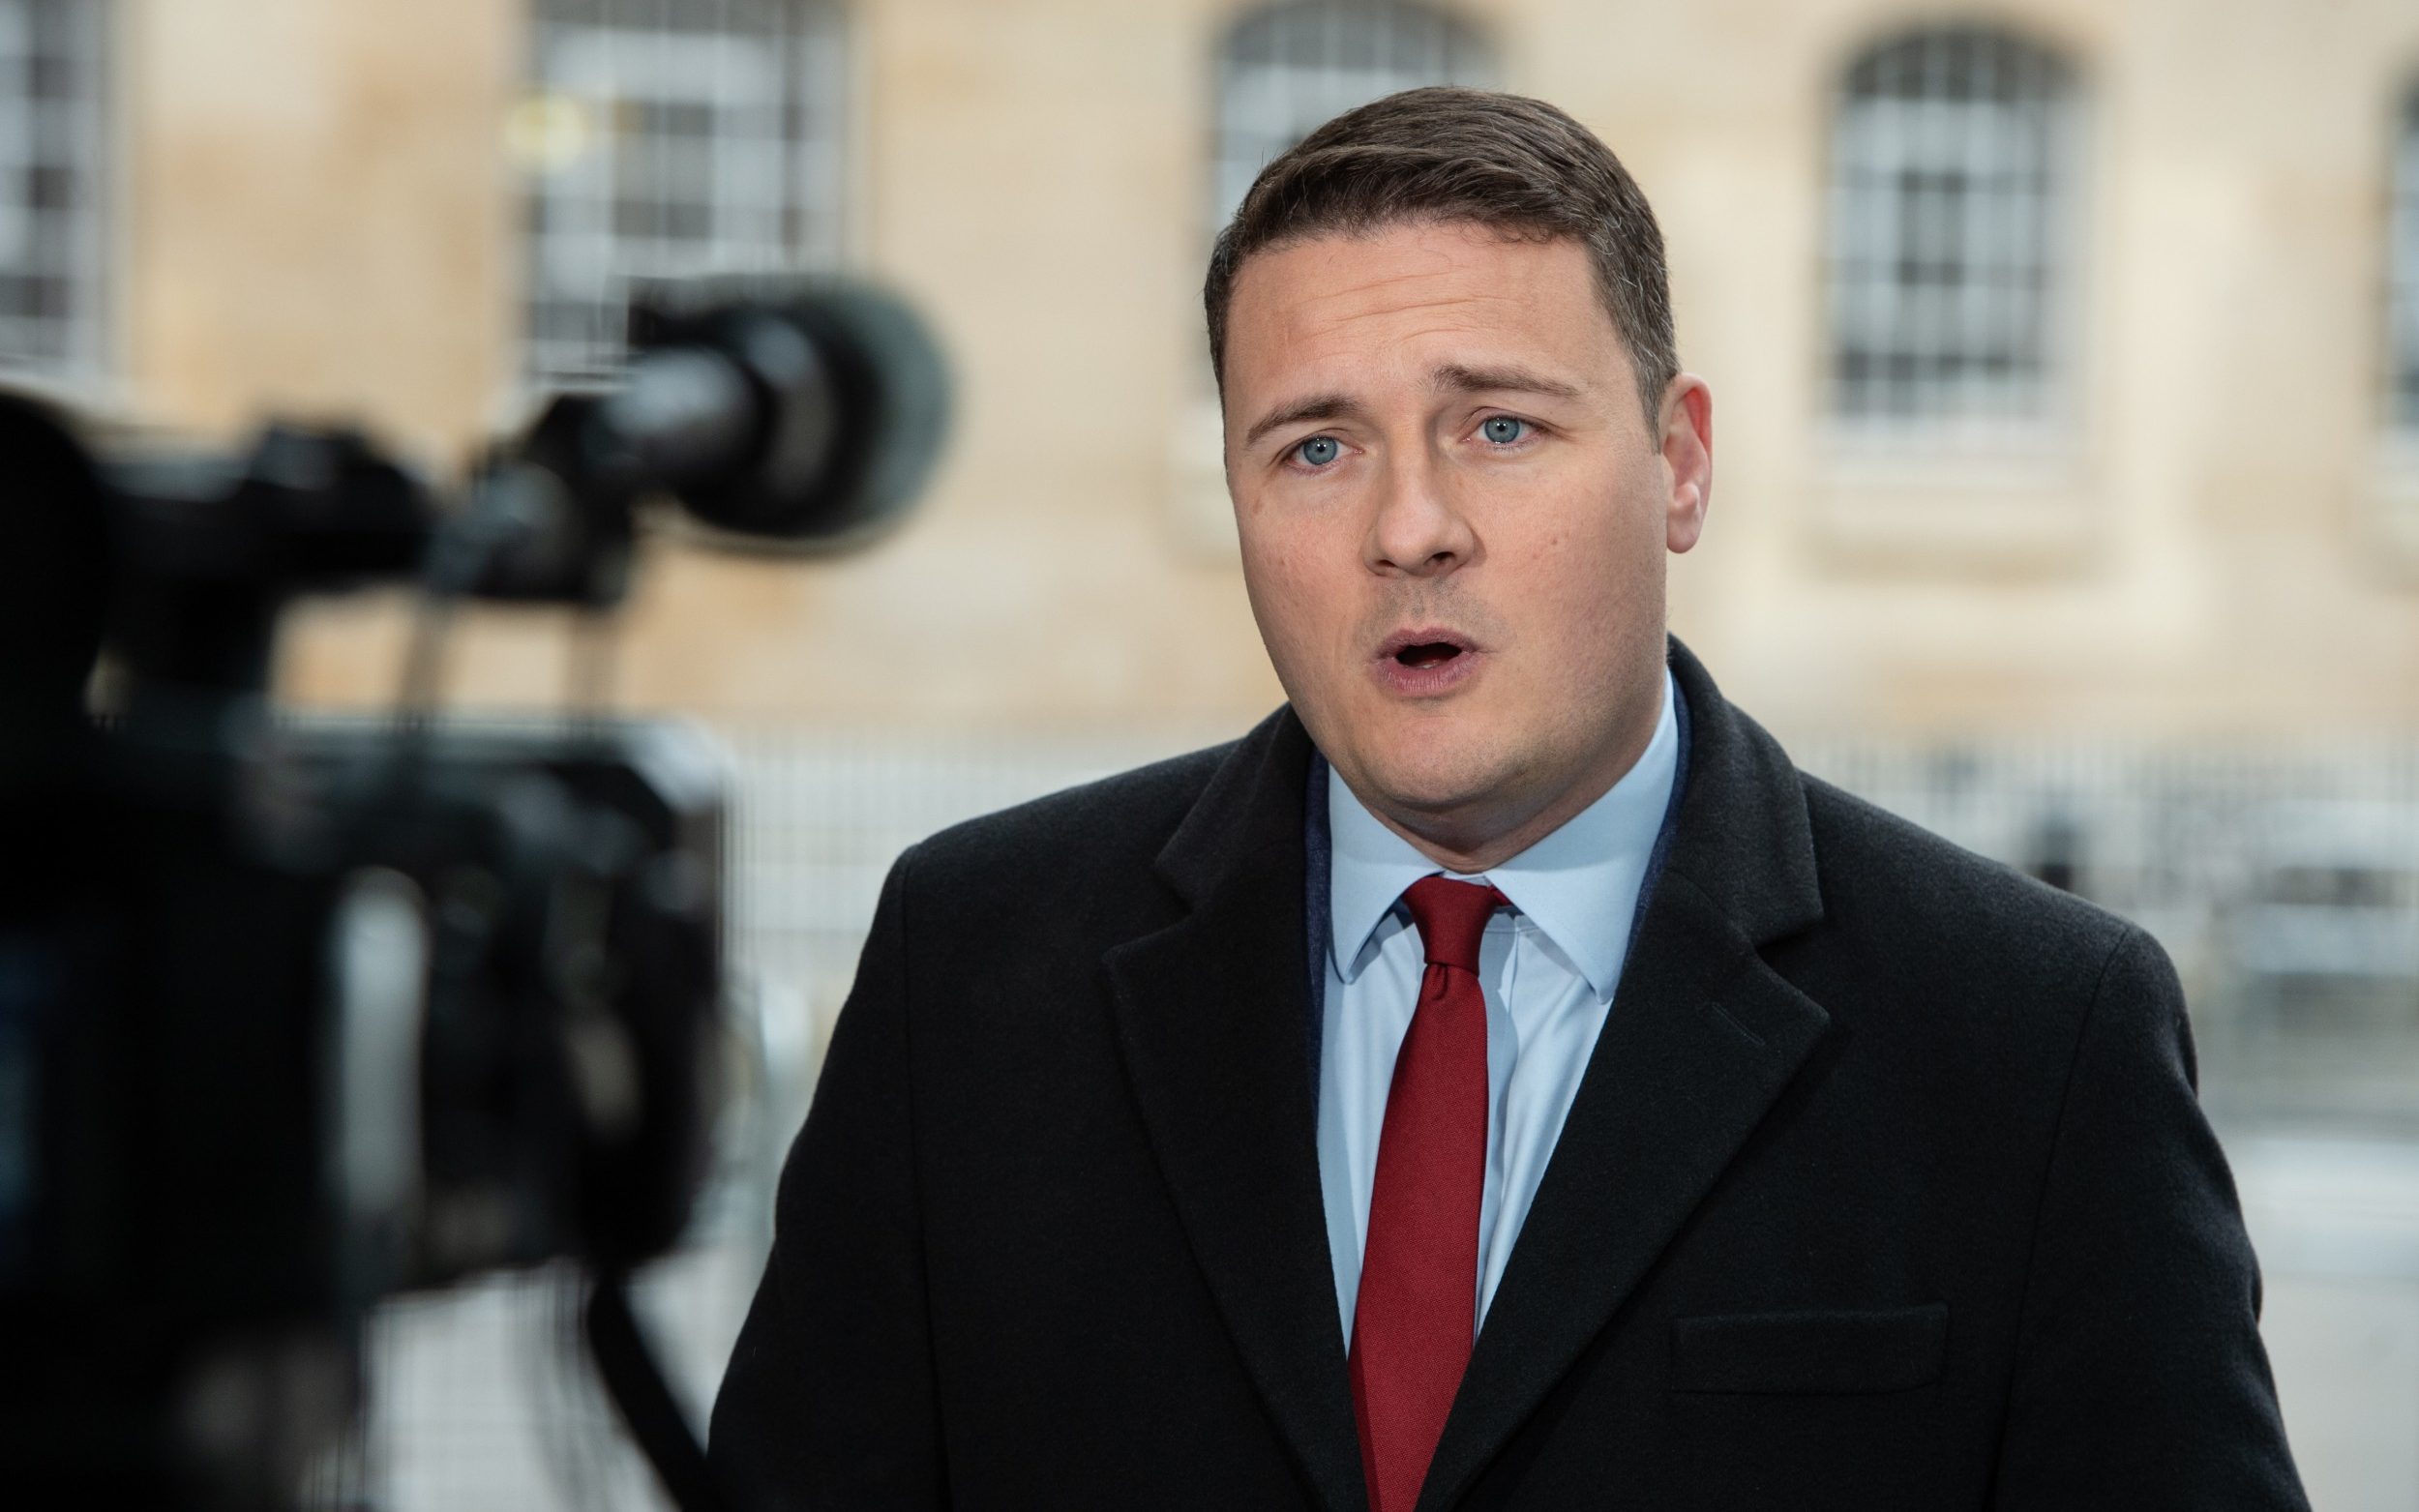 labour in talks with more tory mps about defecting, says streeting